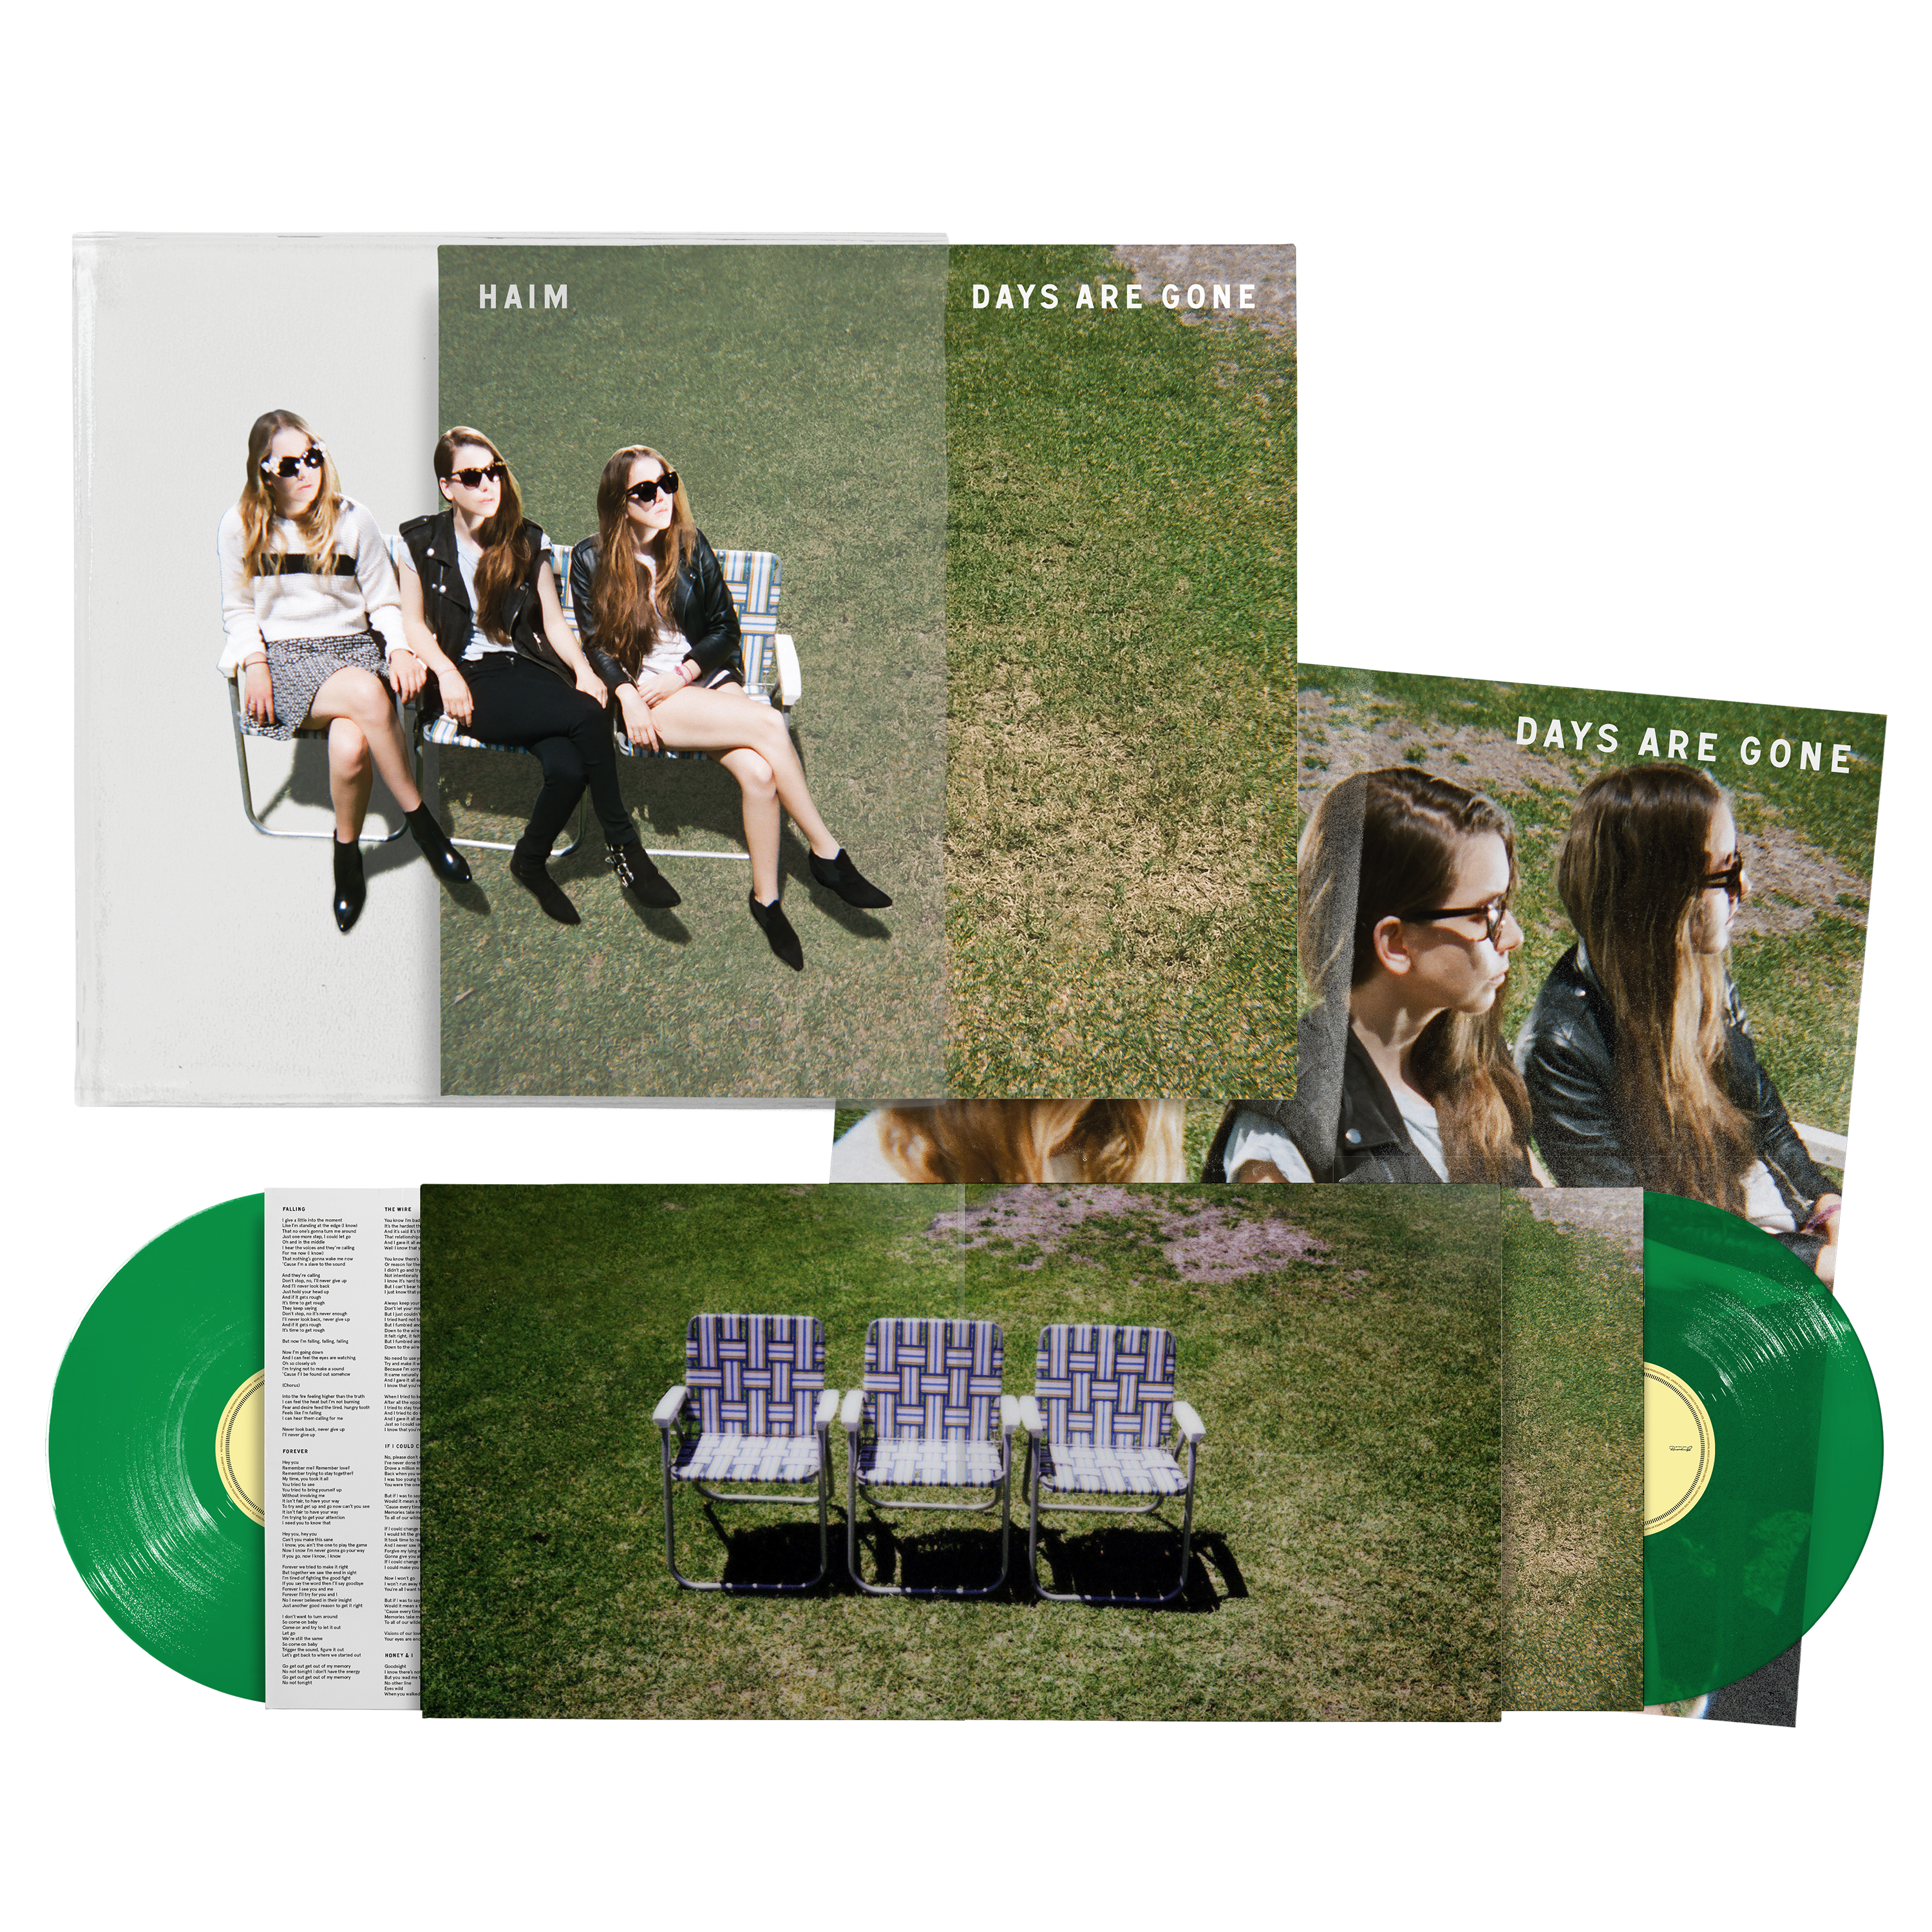 Days Are Gone (10th Anniversary): Transparent Green Vinyl 2LP, Picture Disc, CD, Cassette + Signed Art Card